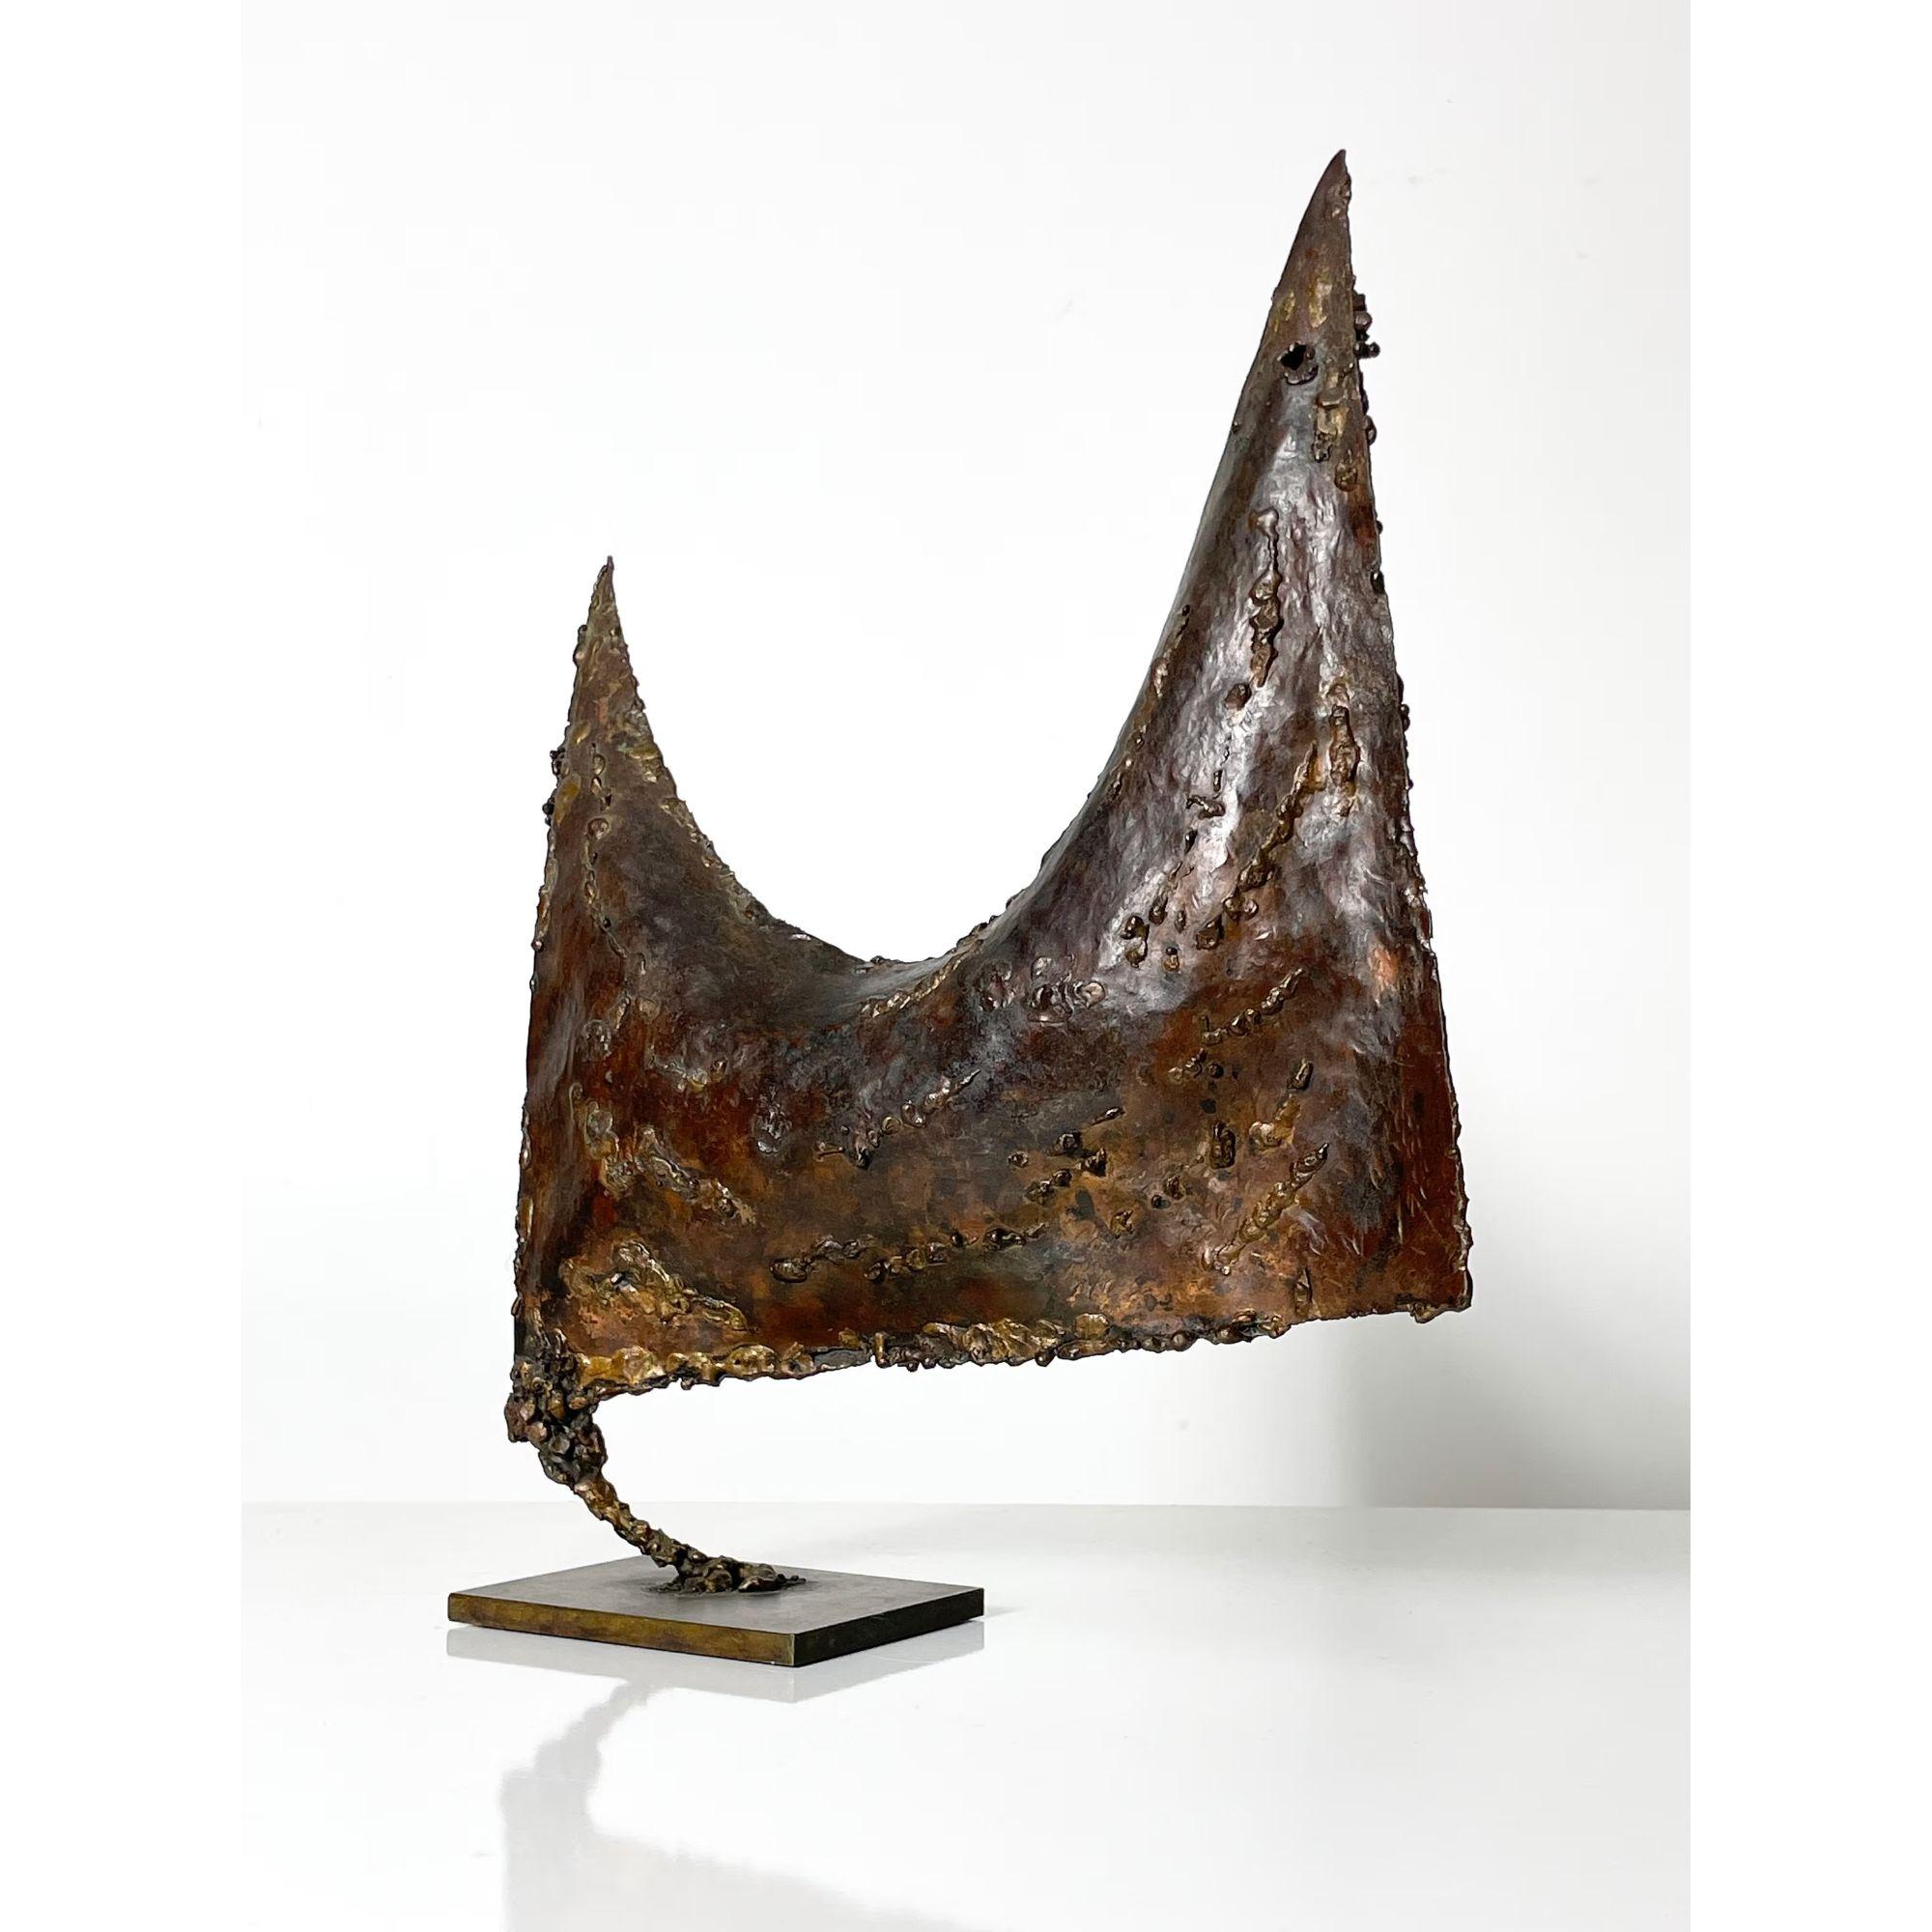 Vintage Mid Century Modern Bronze Sculpture Brutalist Welded Abstract Bird 

Very unique Brutalist abstract bird sculpture circa 1960s
Modernist piece in welded bronze cantilevered on solid base
Unsigned

Additional Information:
Materials: